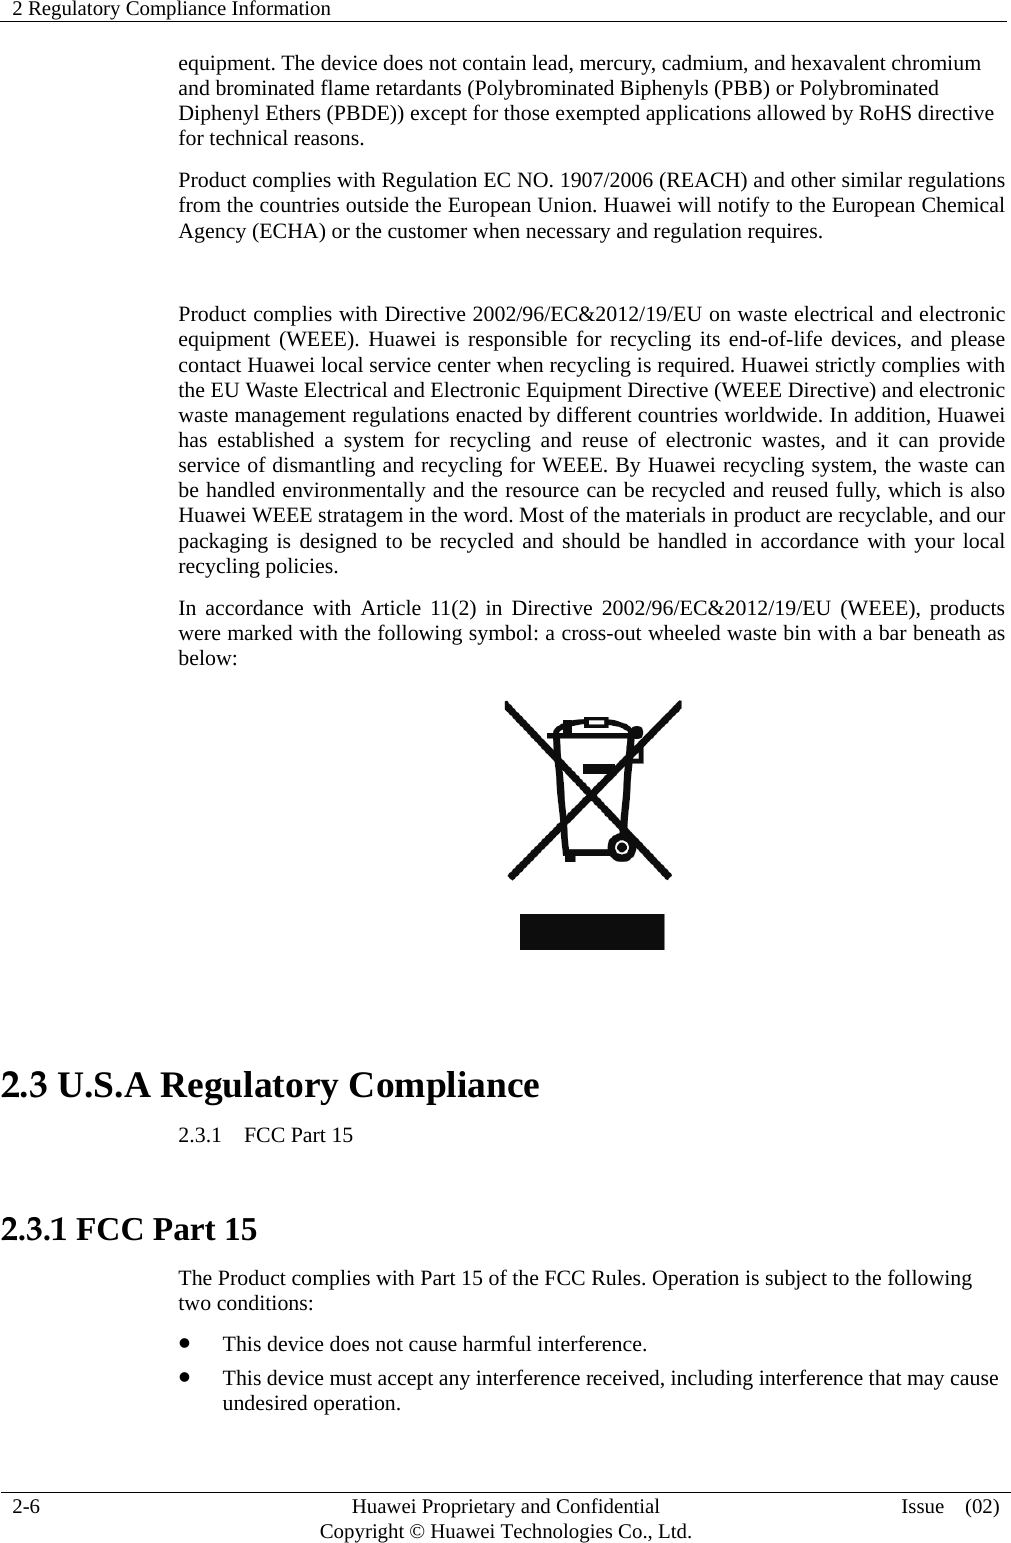 2 Regulatory Compliance Information     2-6  Huawei Proprietary and Confidential         Copyright © Huawei Technologies Co., Ltd.  Issue  (02)  equipment. The device does not contain lead, mercury, cadmium, and hexavalent chromium and brominated flame retardants (Polybrominated Biphenyls (PBB) or Polybrominated Diphenyl Ethers (PBDE)) except for those exempted applications allowed by RoHS directive for technical reasons.   Product complies with Regulation EC NO. 1907/2006 (REACH) and other similar regulations from the countries outside the European Union. Huawei will notify to the European Chemical Agency (ECHA) or the customer when necessary and regulation requires.  Product complies with Directive 2002/96/EC&amp;2012/19/EU on waste electrical and electronic equipment (WEEE). Huawei is responsible for recycling its end-of-life devices, and please contact Huawei local service center when recycling is required. Huawei strictly complies with the EU Waste Electrical and Electronic Equipment Directive (WEEE Directive) and electronic waste management regulations enacted by different countries worldwide. In addition, Huawei has established a system for recycling and reuse of electronic wastes, and it can provide service of dismantling and recycling for WEEE. By Huawei recycling system, the waste can be handled environmentally and the resource can be recycled and reused fully, which is also Huawei WEEE stratagem in the word. Most of the materials in product are recyclable, and our packaging is designed to be recycled and should be handled in accordance with your local recycling policies.   In accordance with Article 11(2) in Directive 2002/96/EC&amp;2012/19/EU (WEEE), products were marked with the following symbol: a cross-out wheeled waste bin with a bar beneath as below:   2.3 U.S.A Regulatory Compliance 2.3.1  FCC Part 15  2.3.1 FCC Part 15 The Product complies with Part 15 of the FCC Rules. Operation is subject to the following two conditions:  This device does not cause harmful interference.  This device must accept any interference received, including interference that may cause undesired operation. 